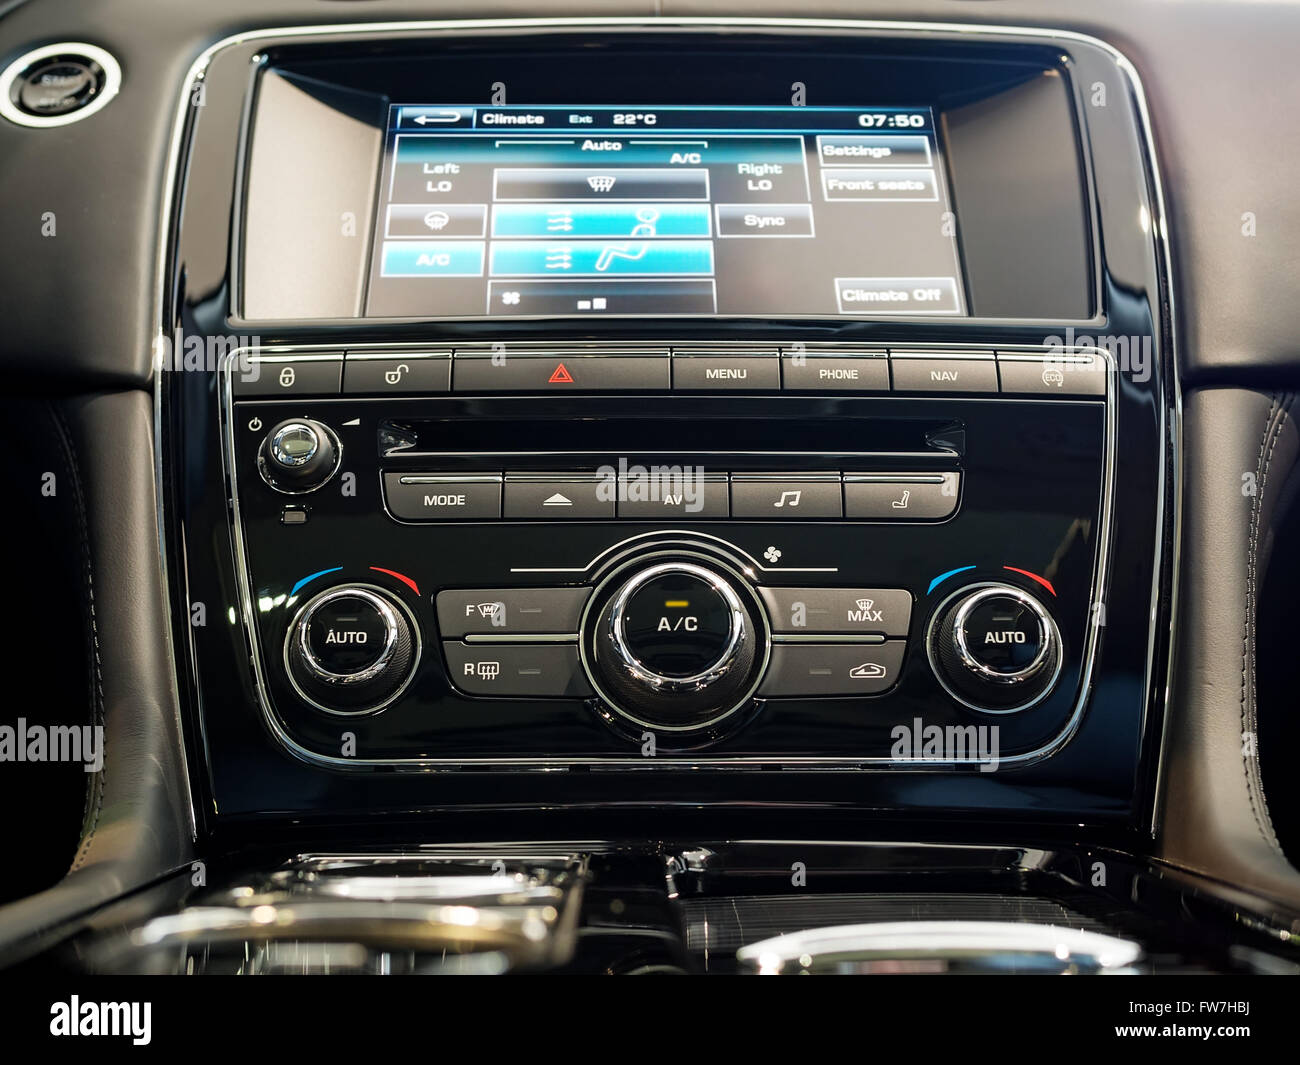 Center console and screen of a luxury car Stock Photo - Alamy